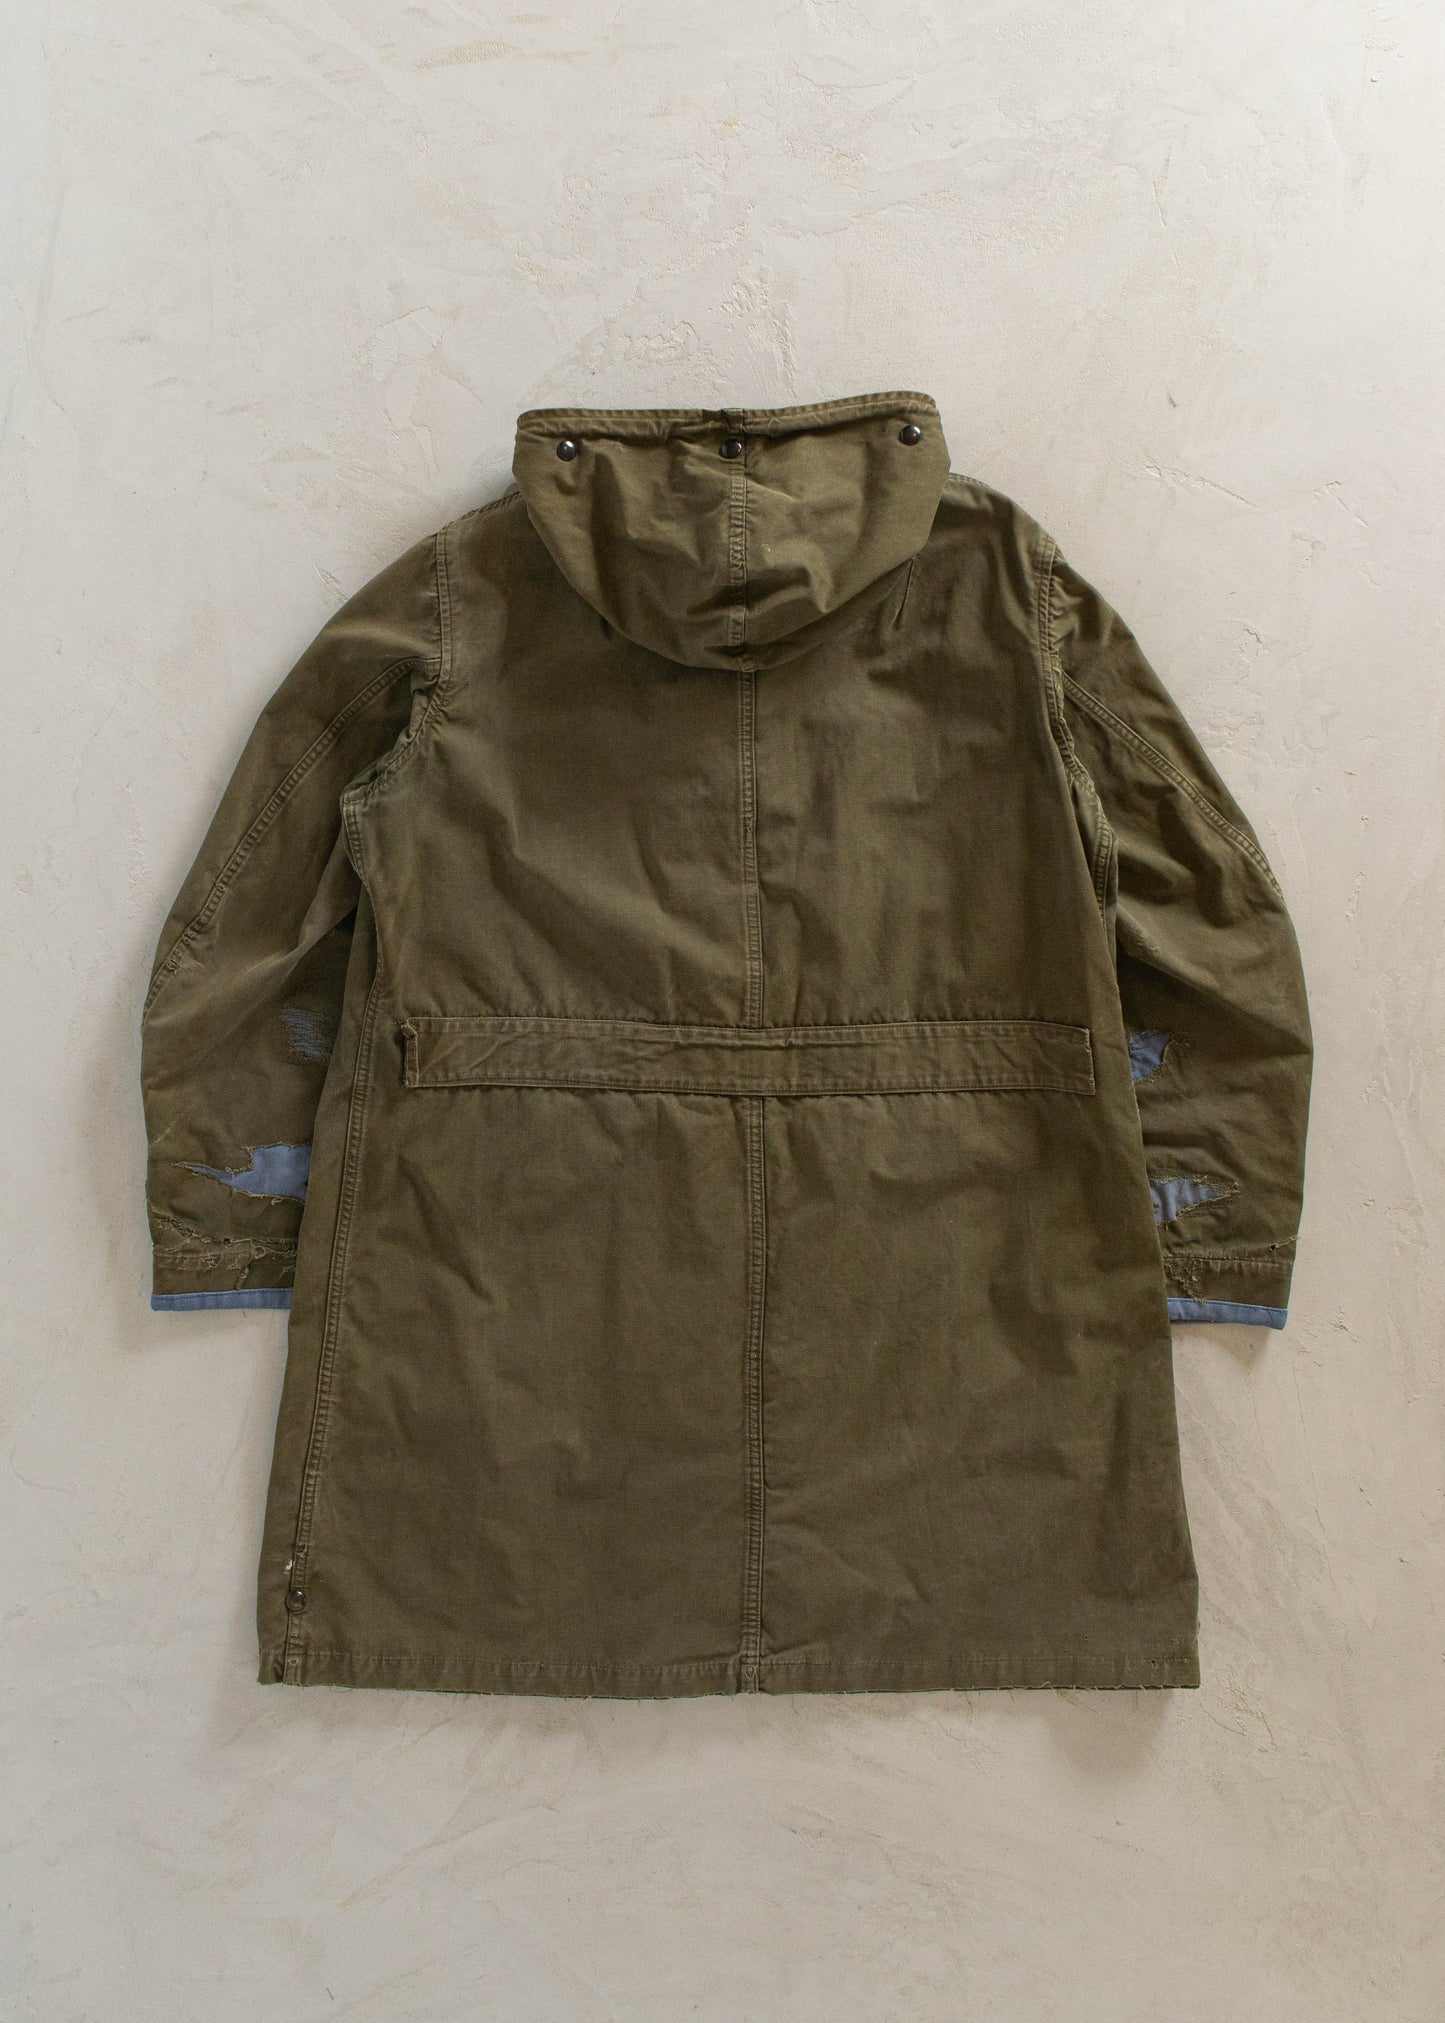 1951 Military Air Force Overcoat Parka Jacket Size M/L